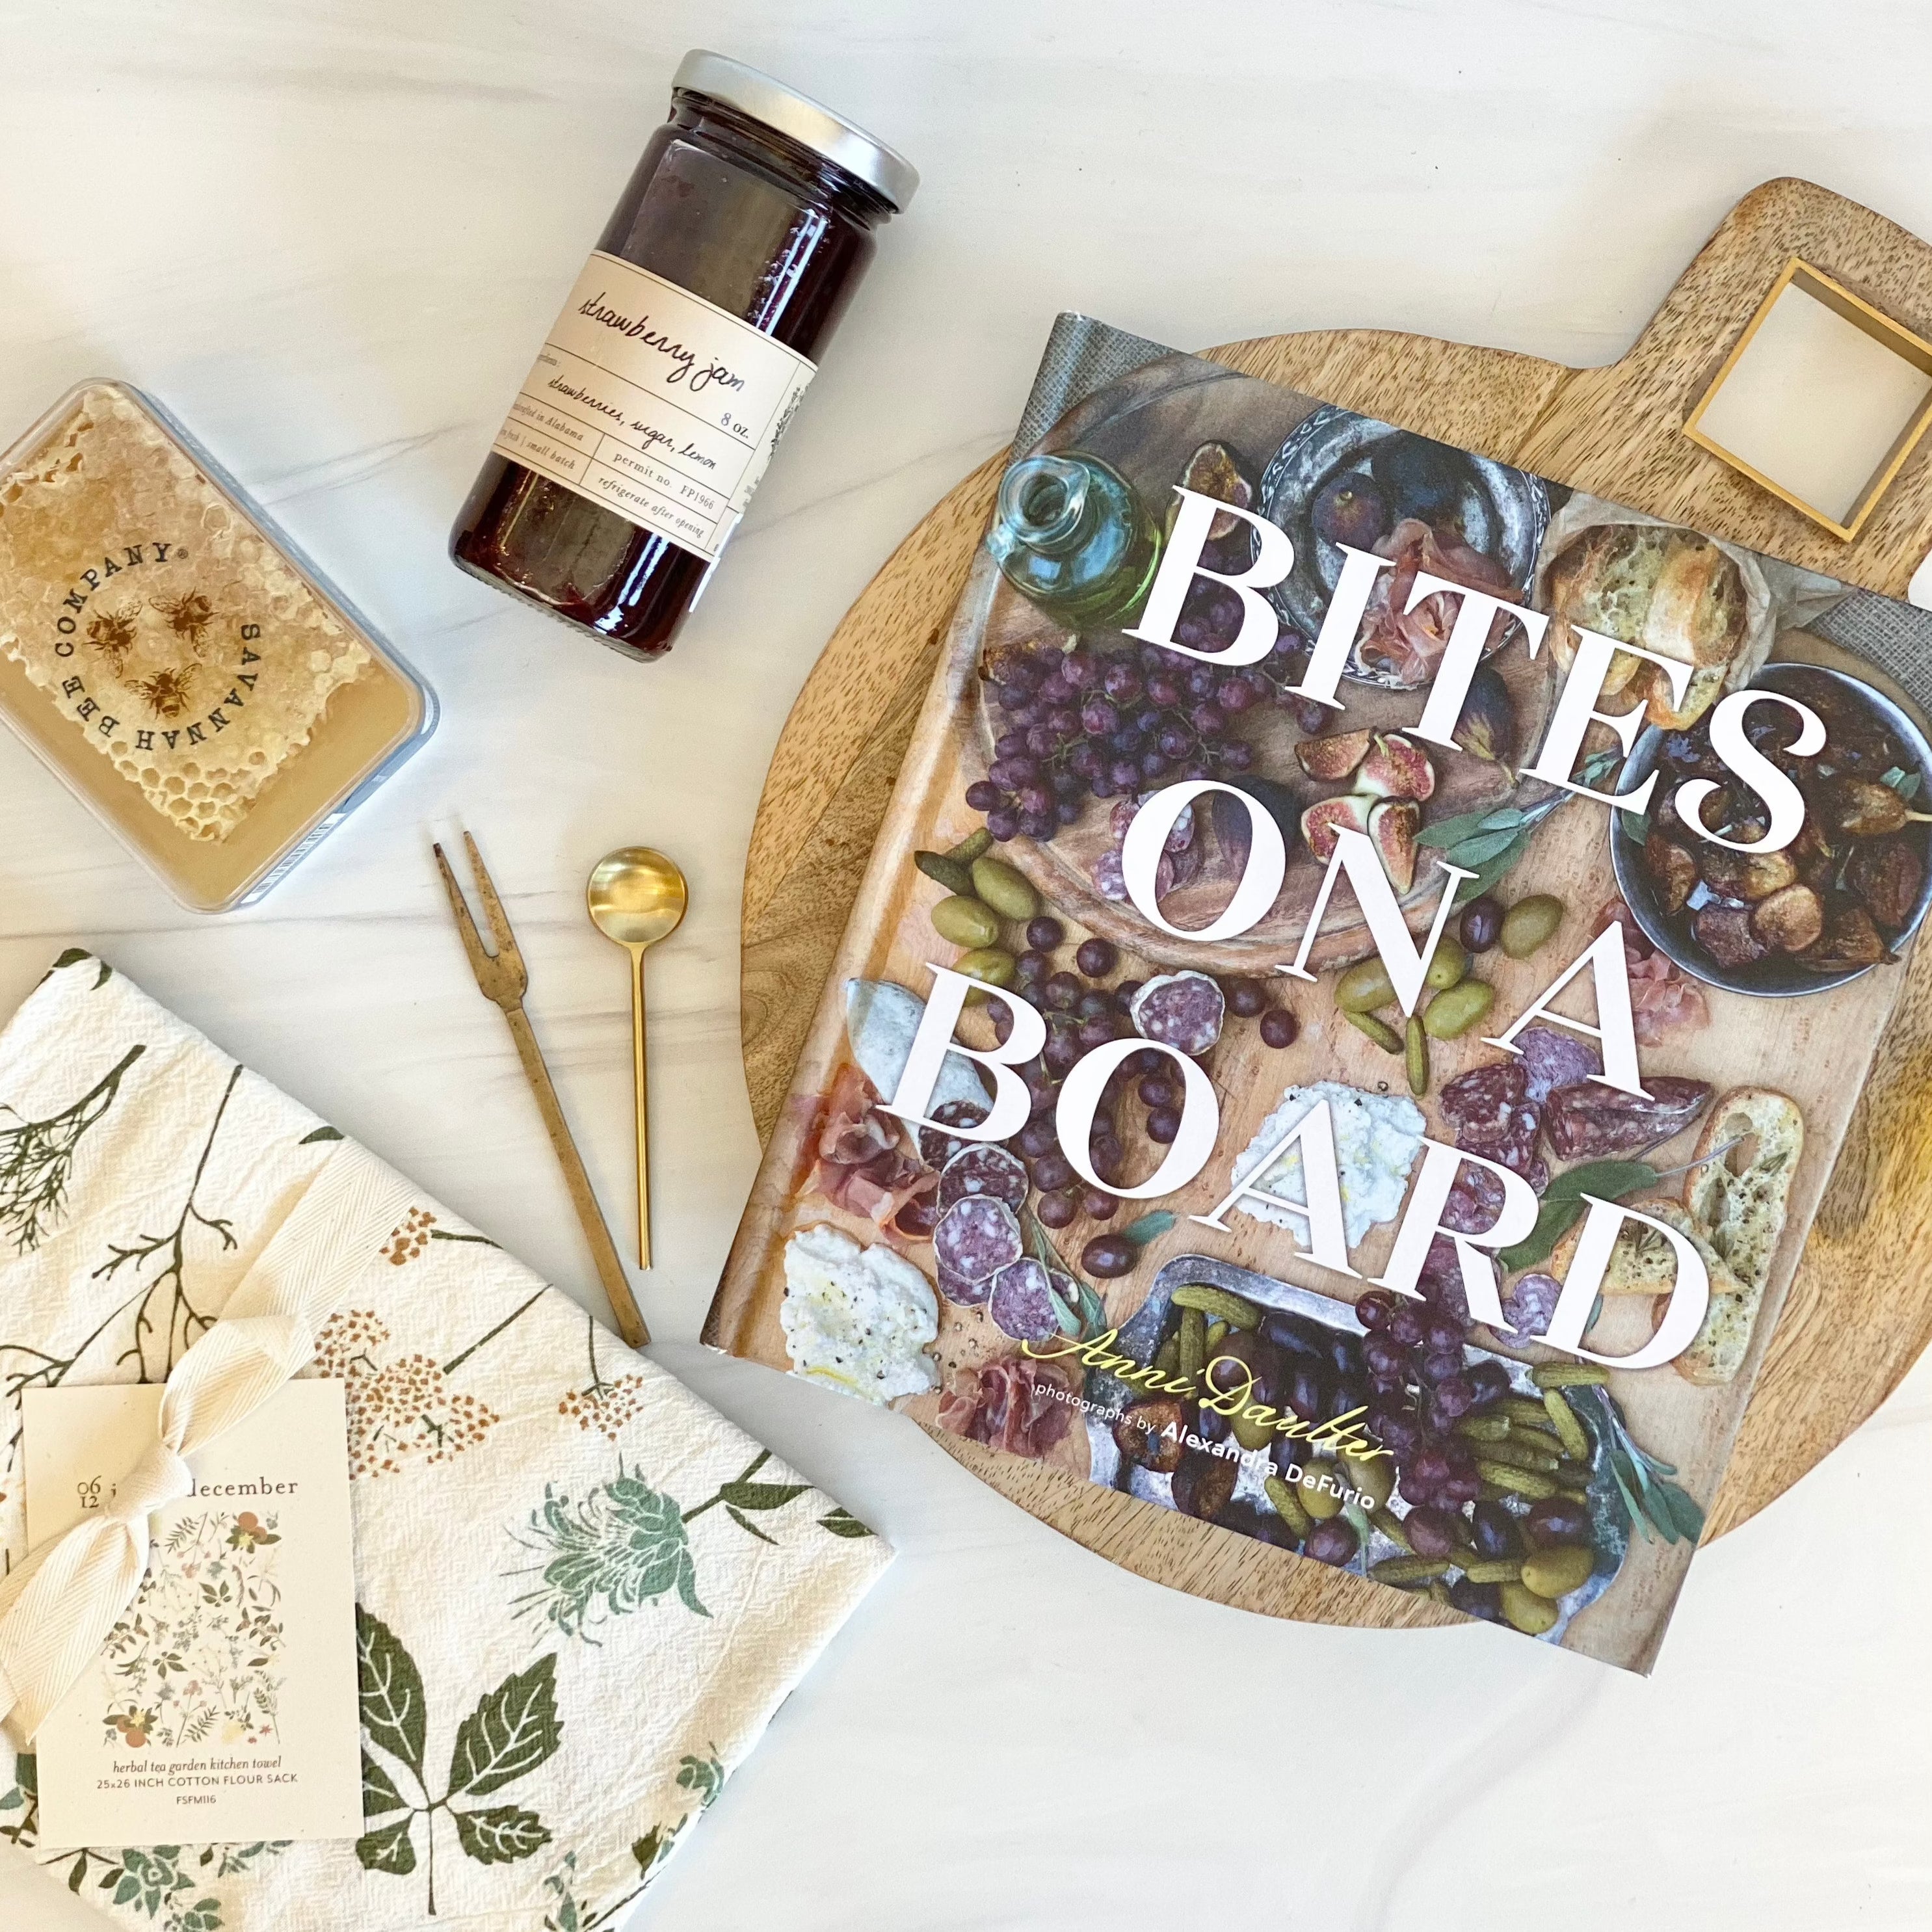 Bites on a Board Cookbook by Anni Daulter